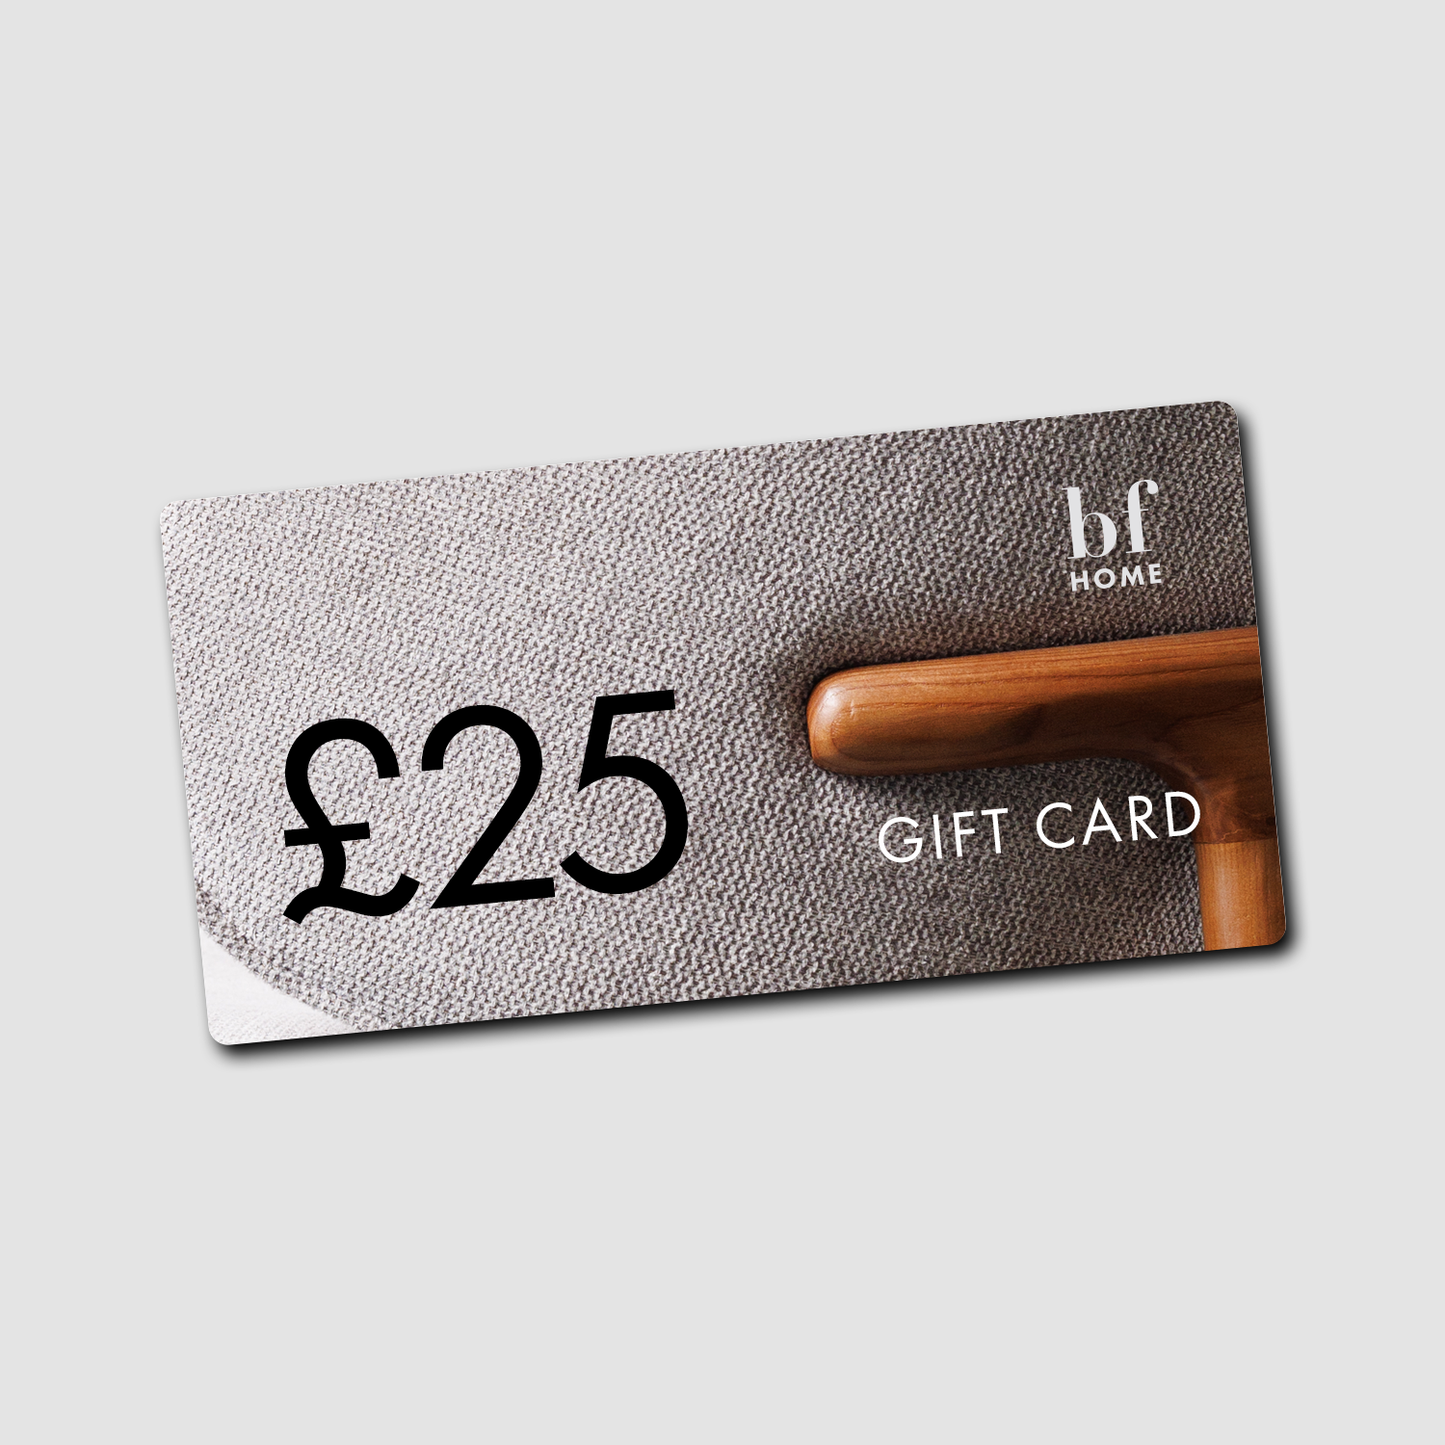 BF Home Gift Card £50